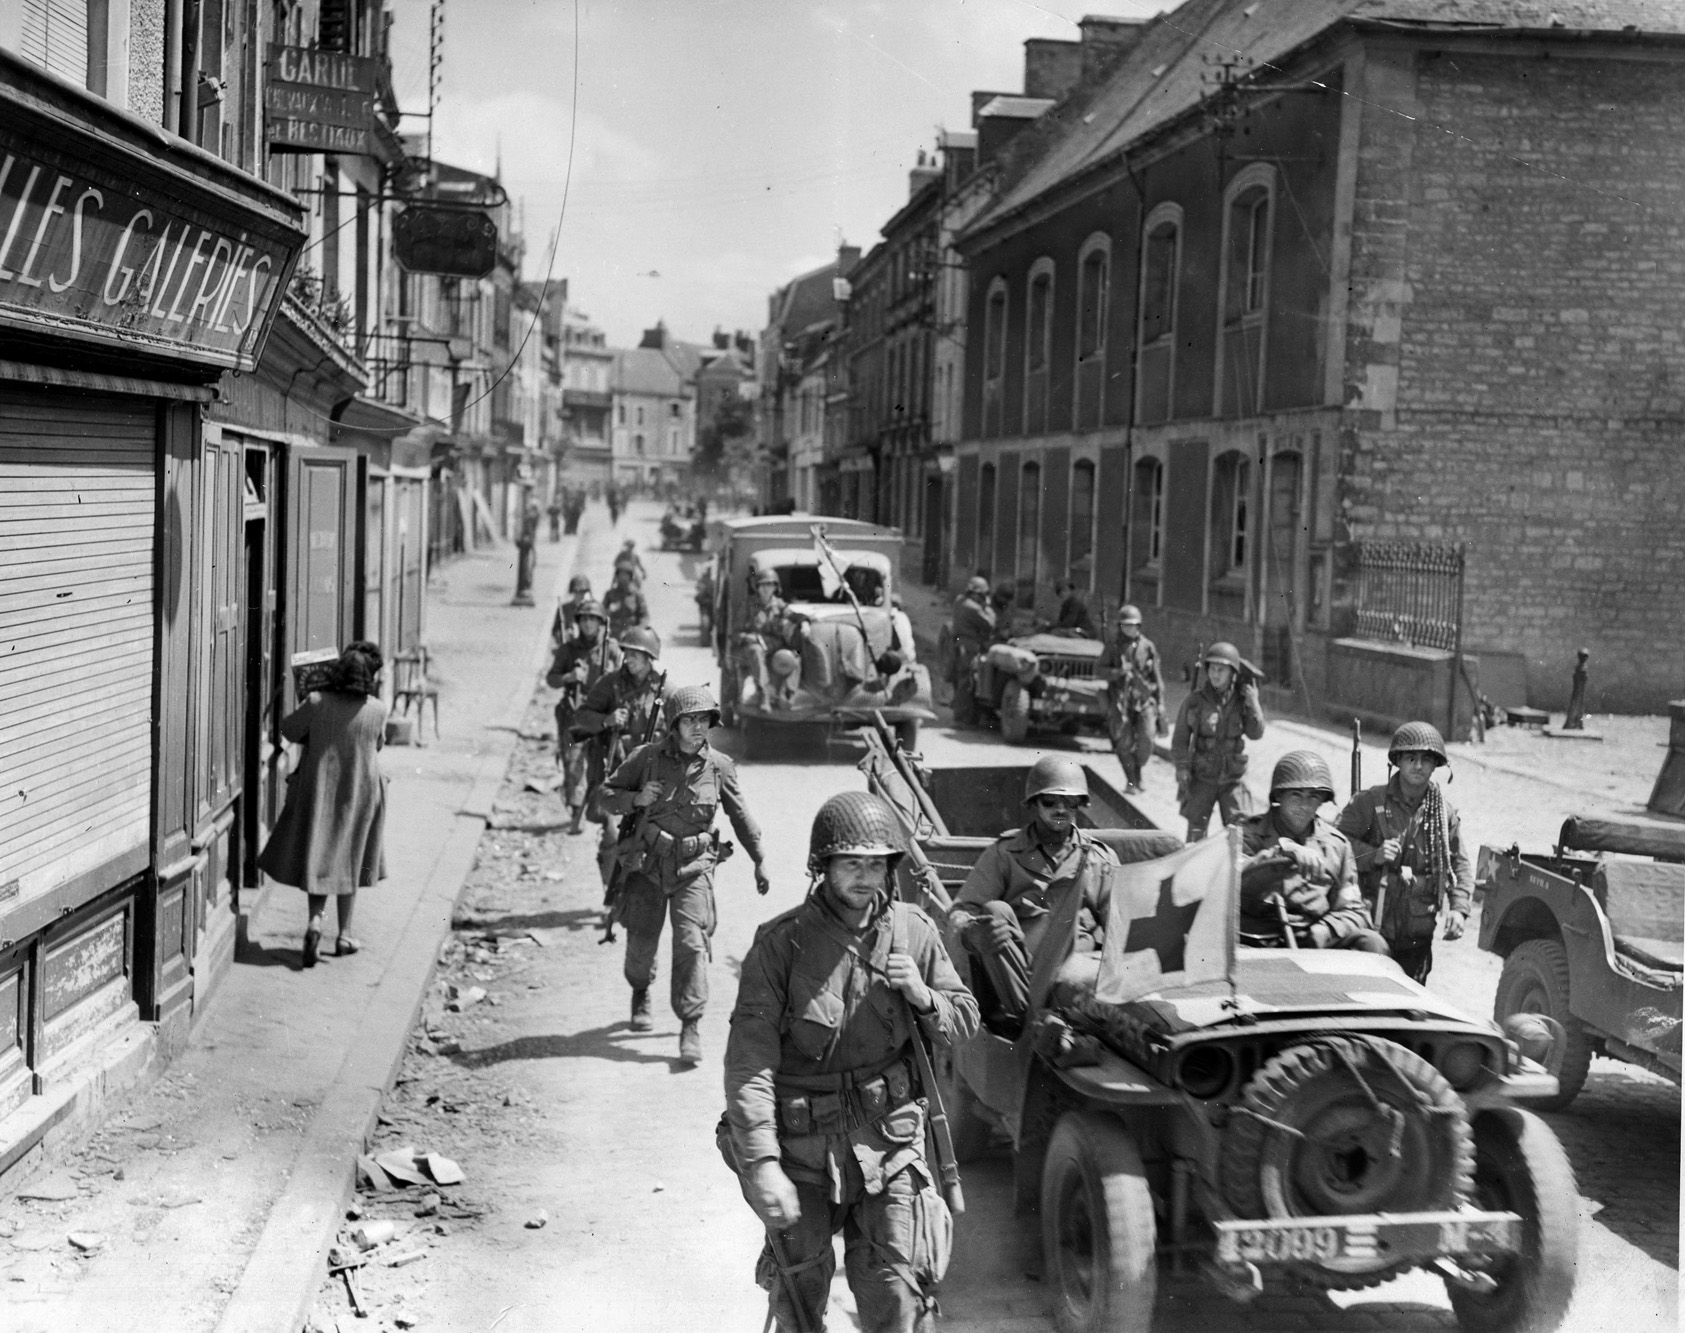 Stiff enemy opposition having finally been overcome, troops and vehicles, including a medical jeep, roll through Carentan.